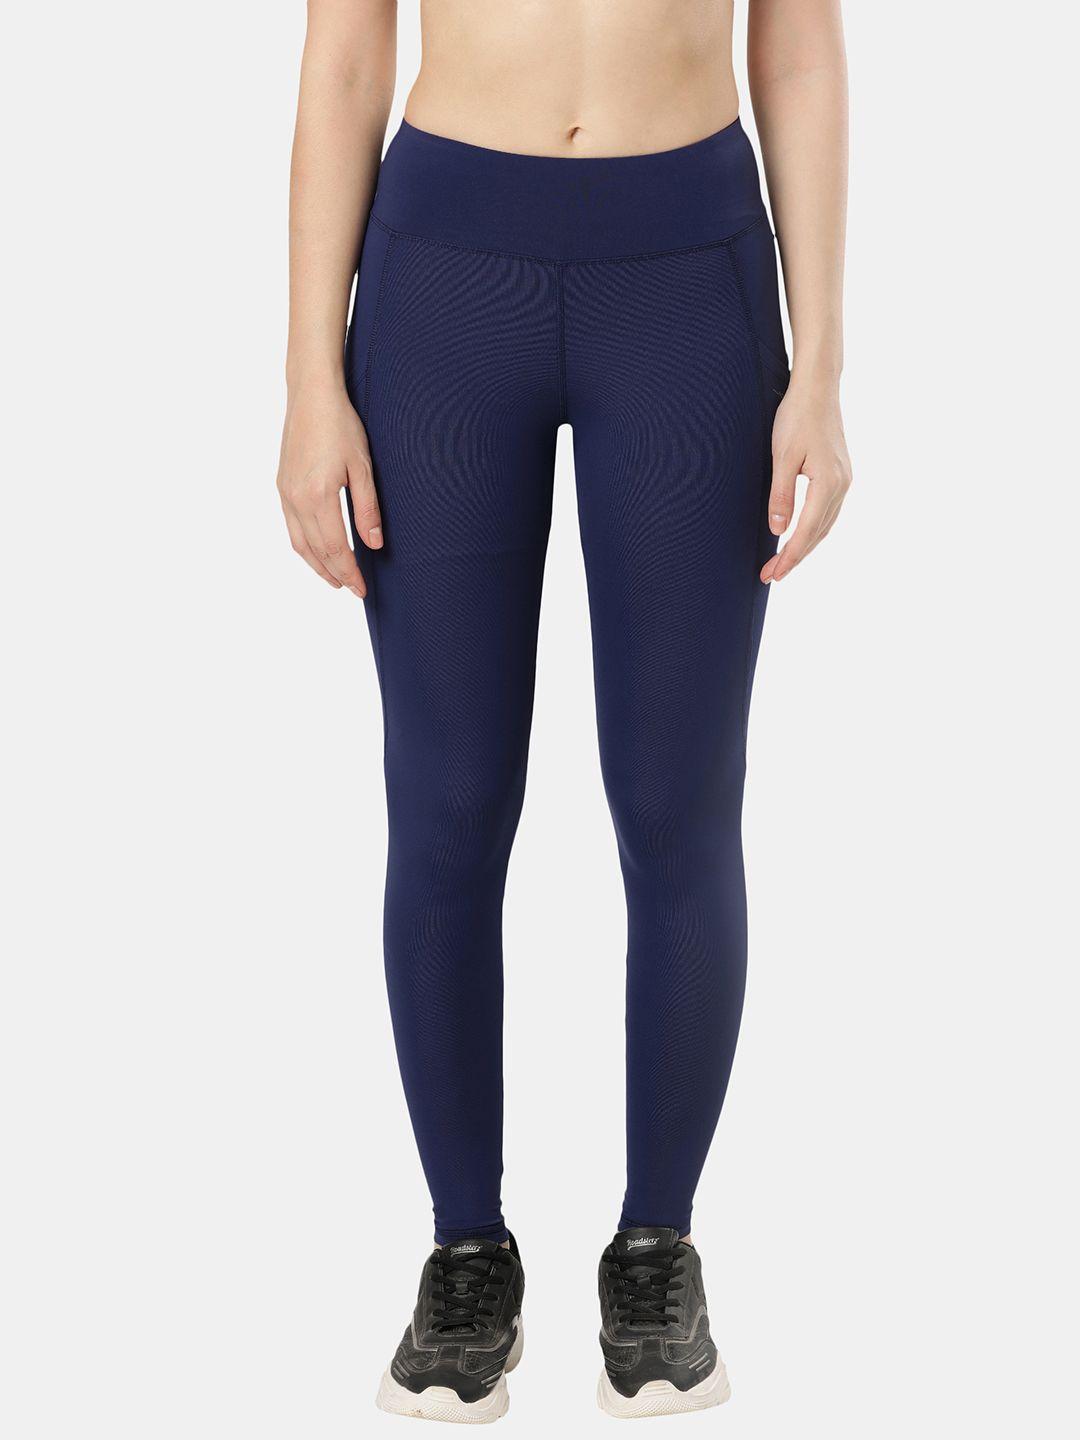 jockey women navy blue solid ankle length tights